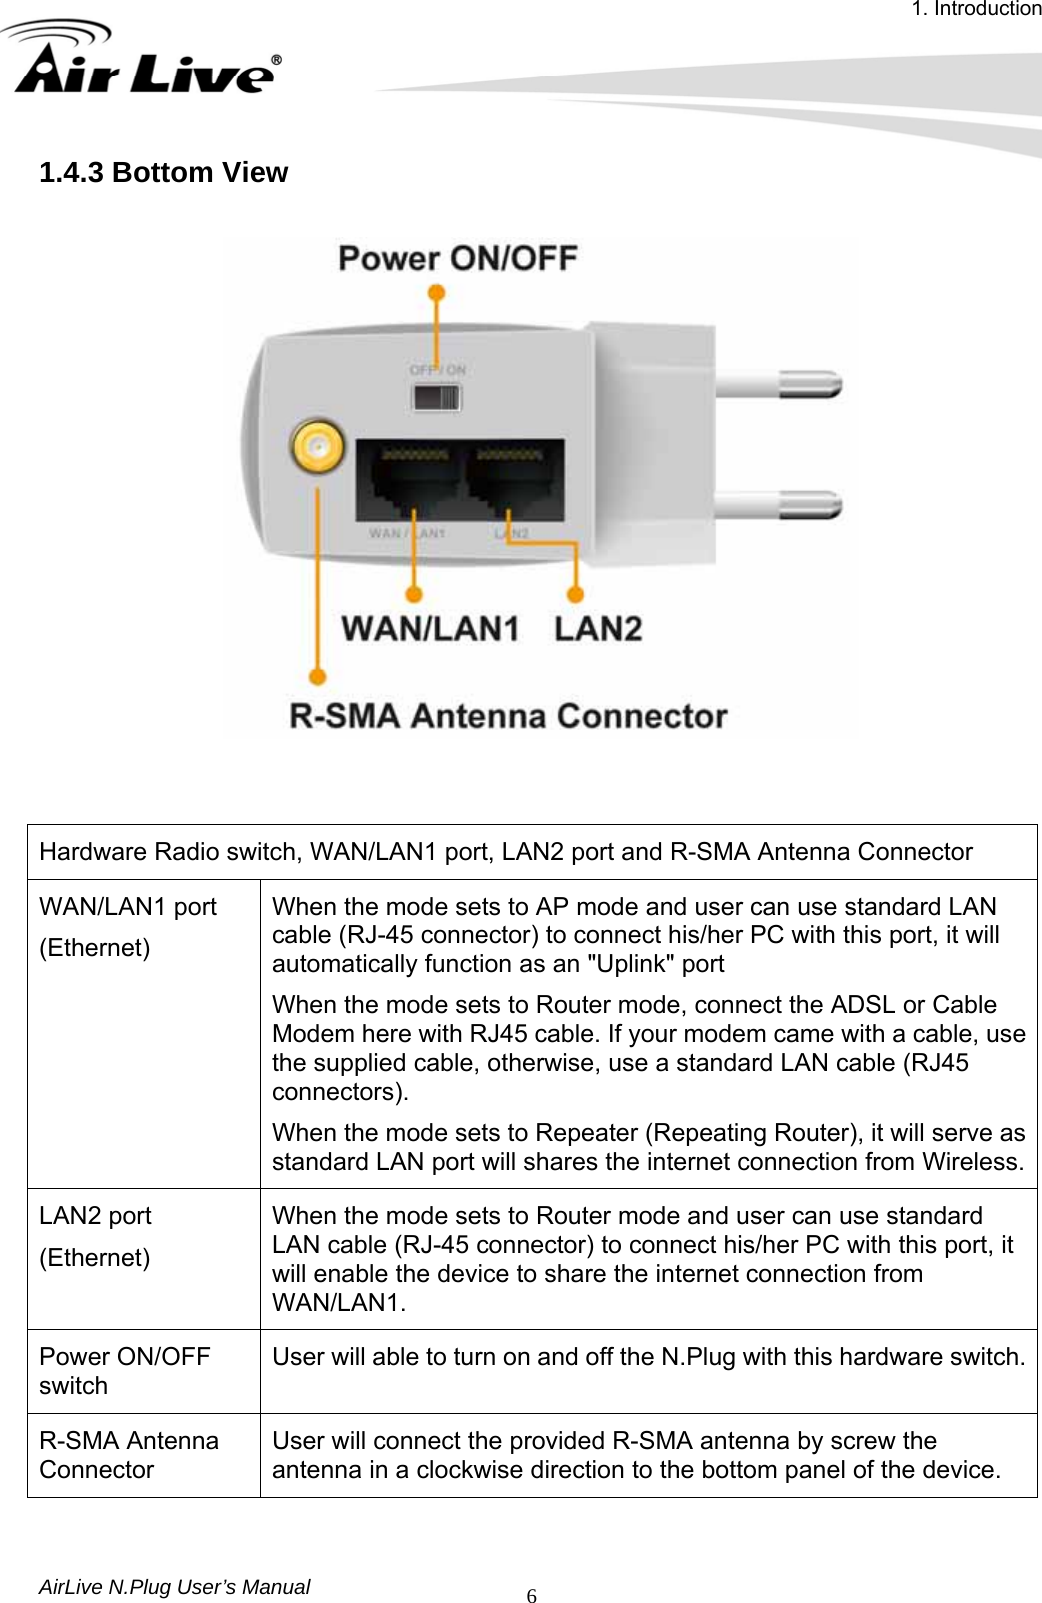 1. Introduction AirLive N.Plug User’s Manual  61.4.3 Bottom View     Hardware Radio switch, WAN/LAN1 port, LAN2 port and R-SMA Antenna Connector WAN/LAN1 port (Ethernet) When the mode sets to AP mode and user can use standard LAN cable (RJ-45 connector) to connect his/her PC with this port, it will automatically function as an &quot;Uplink&quot; port When the mode sets to Router mode, connect the ADSL or Cable Modem here with RJ45 cable. If your modem came with a cable, use the supplied cable, otherwise, use a standard LAN cable (RJ45 connectors). When the mode sets to Repeater (Repeating Router), it will serve as standard LAN port will shares the internet connection from Wireless.LAN2 port (Ethernet) When the mode sets to Router mode and user can use standard LAN cable (RJ-45 connector) to connect his/her PC with this port, it will enable the device to share the internet connection from WAN/LAN1. Power ON/OFF switch User will able to turn on and off the N.Plug with this hardware switch.R-SMA Antenna Connector User will connect the provided R-SMA antenna by screw the antenna in a clockwise direction to the bottom panel of the device. 